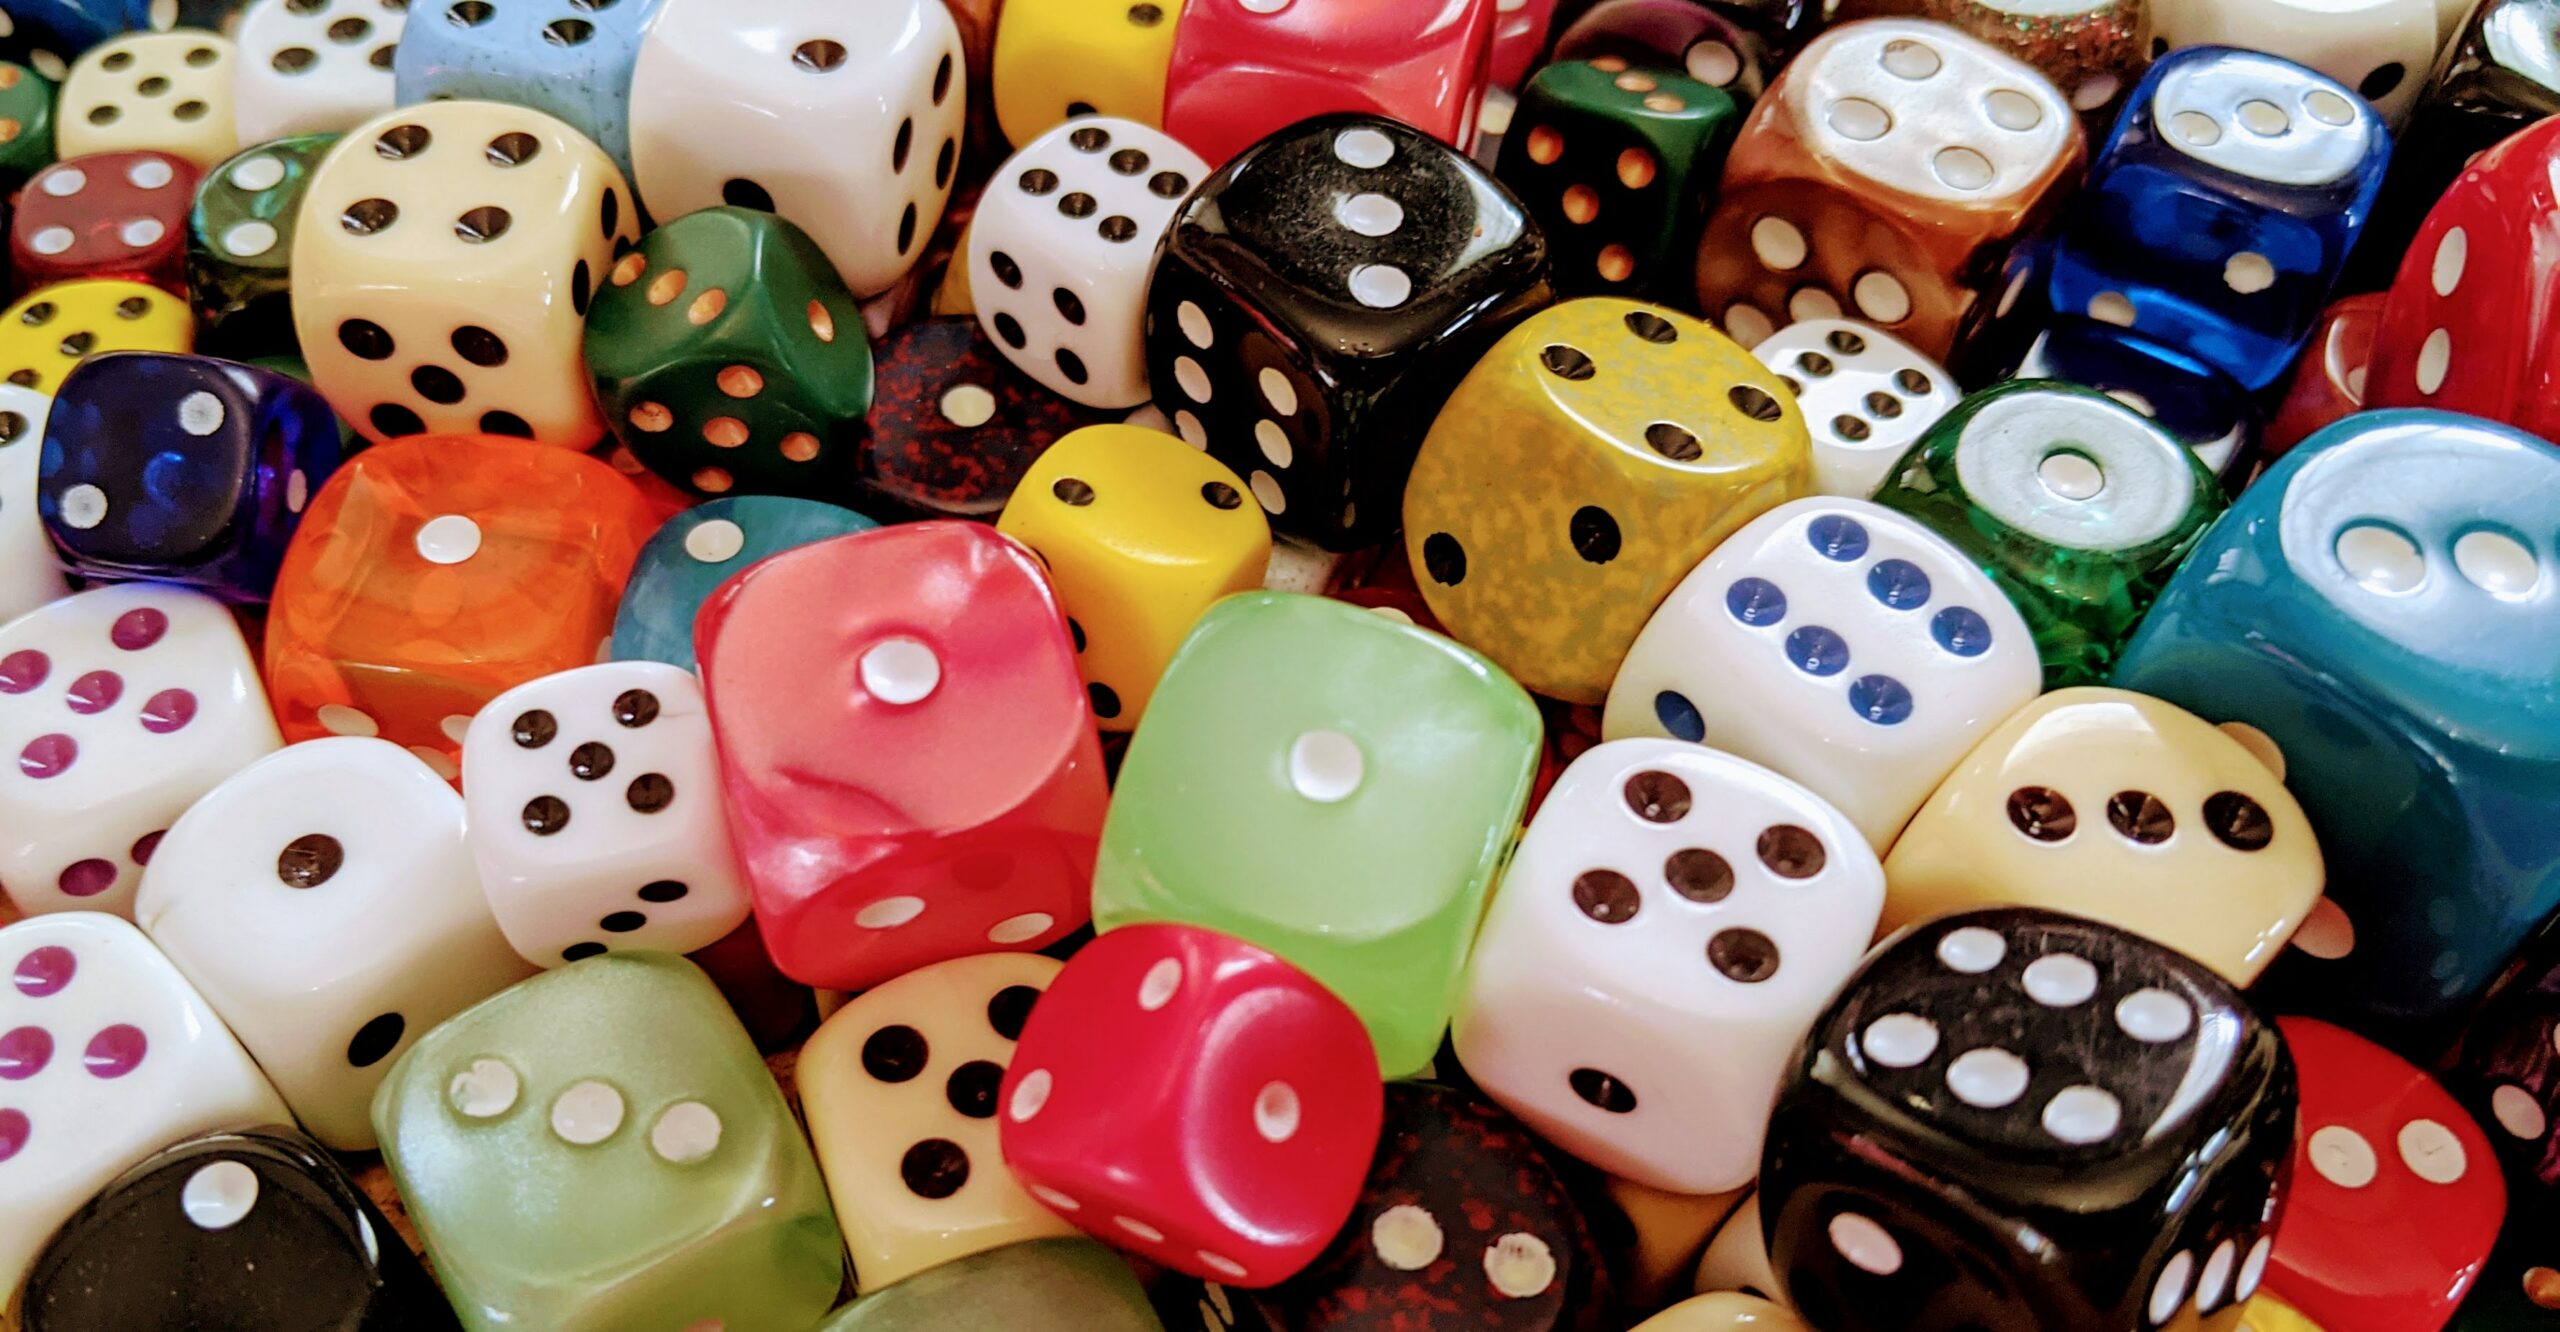 8 Reasons to Get Tested for Celiac Disease image of mixture of die (dice) in various sizes and colors to represent risk factors.